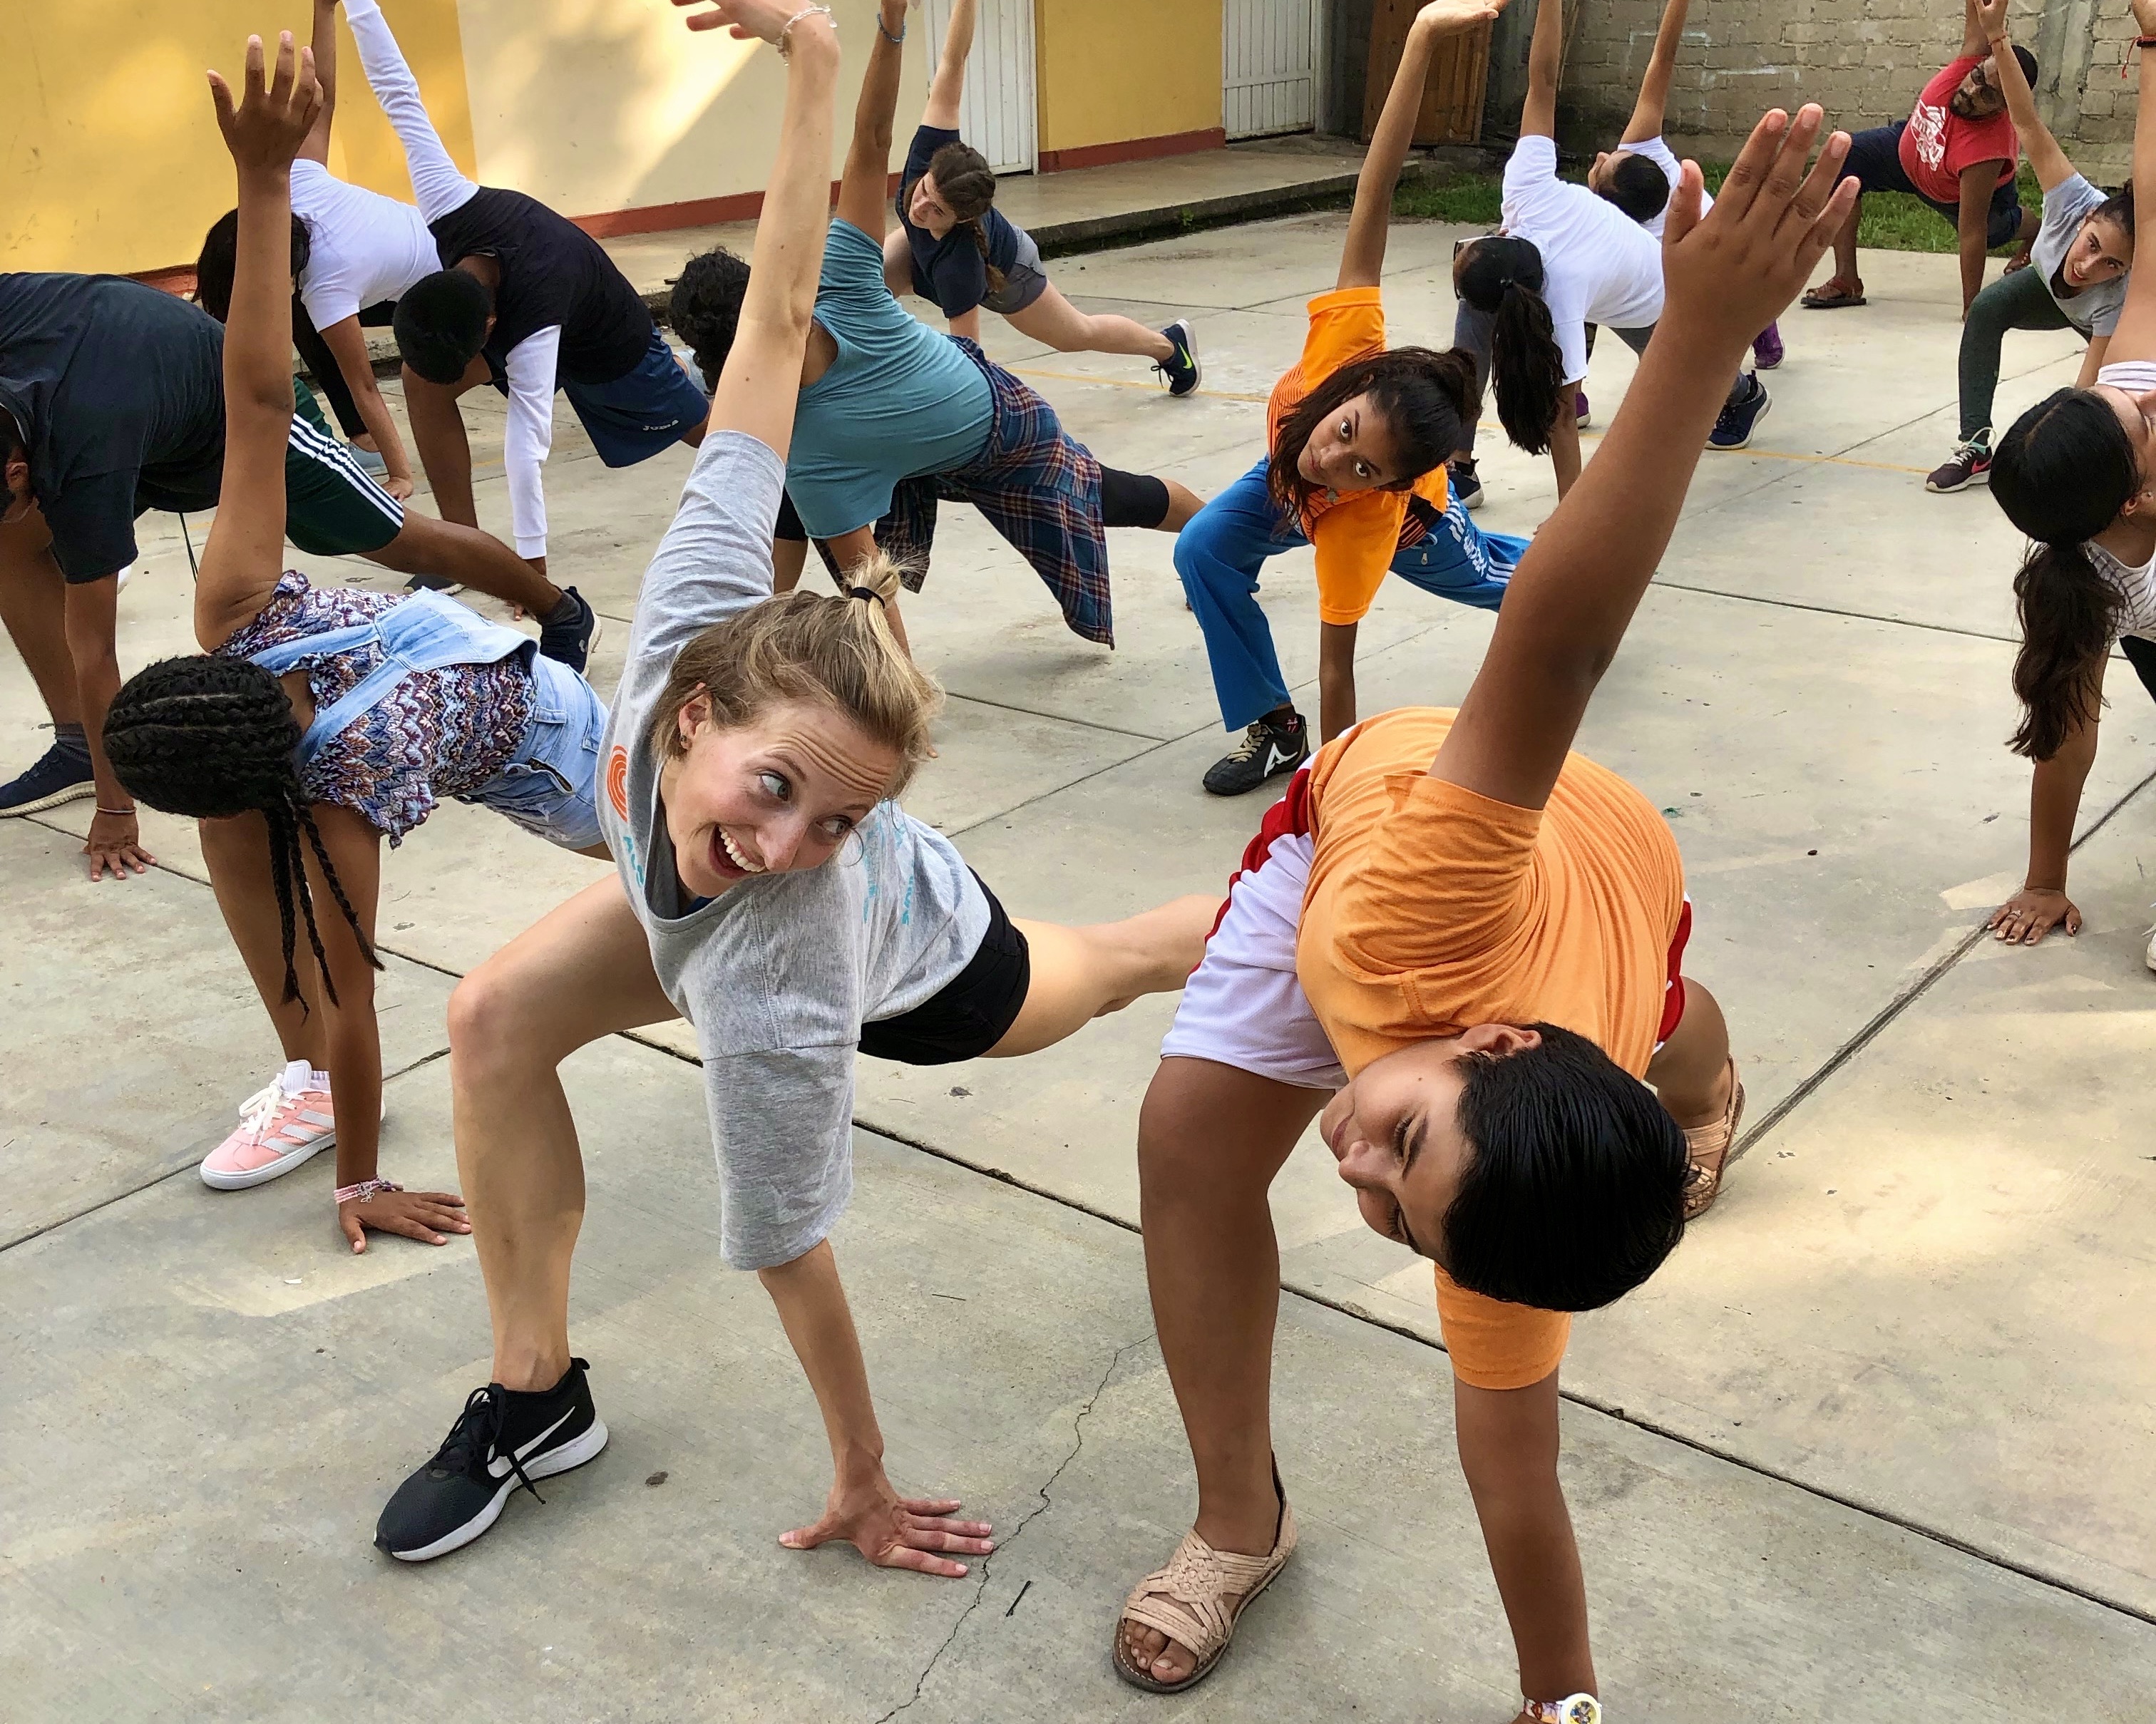 JUNTOSYouth dancers stretching with workshop participants (2019)